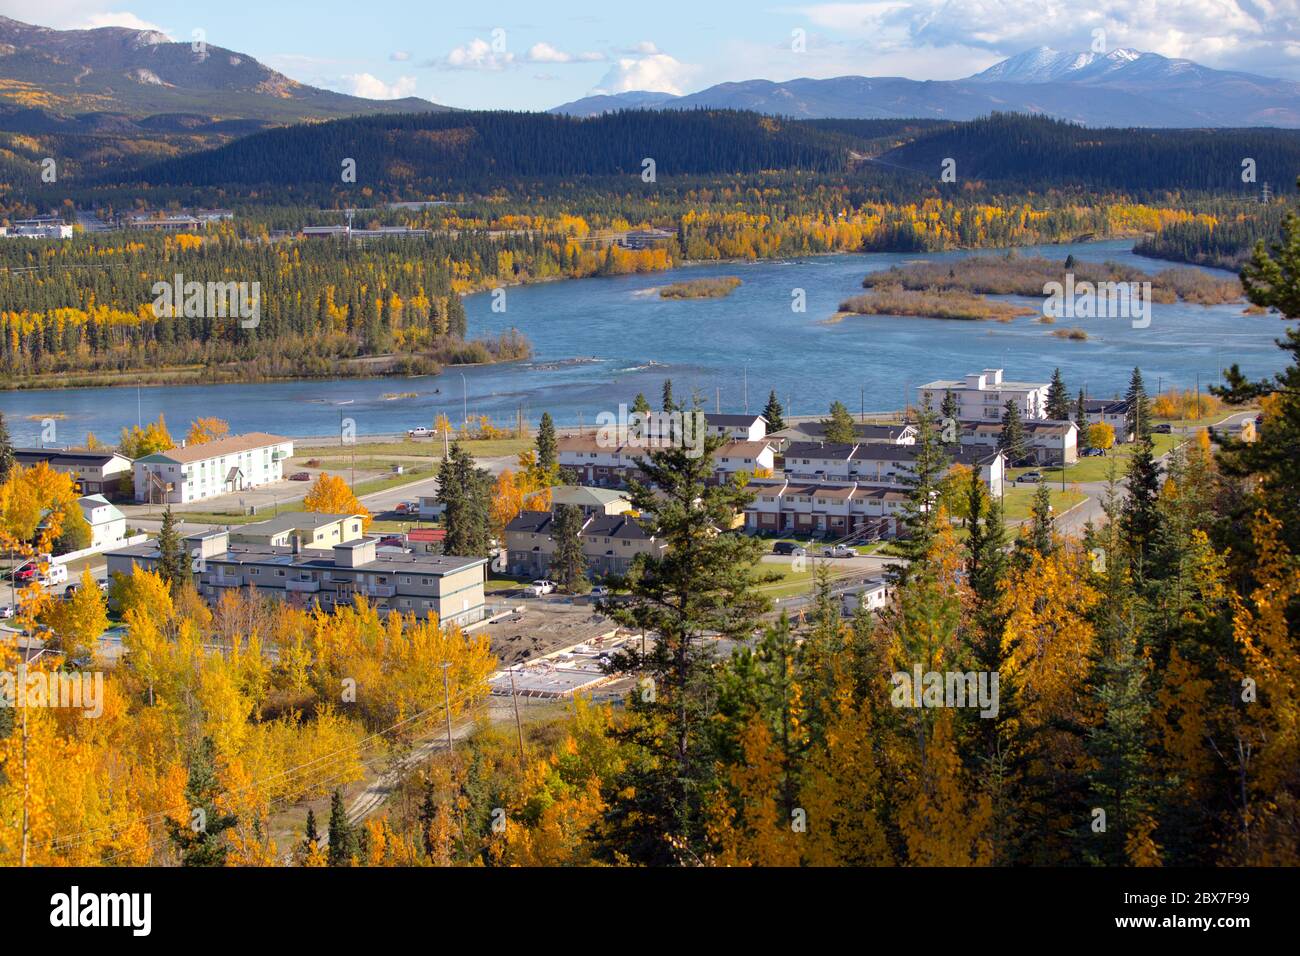 View of the city of Whitehorse, Yukon Territory, Canada.  Image taken from the hiking trails near the Erik Nielsen Whitehorse International Airport. Stock Photo